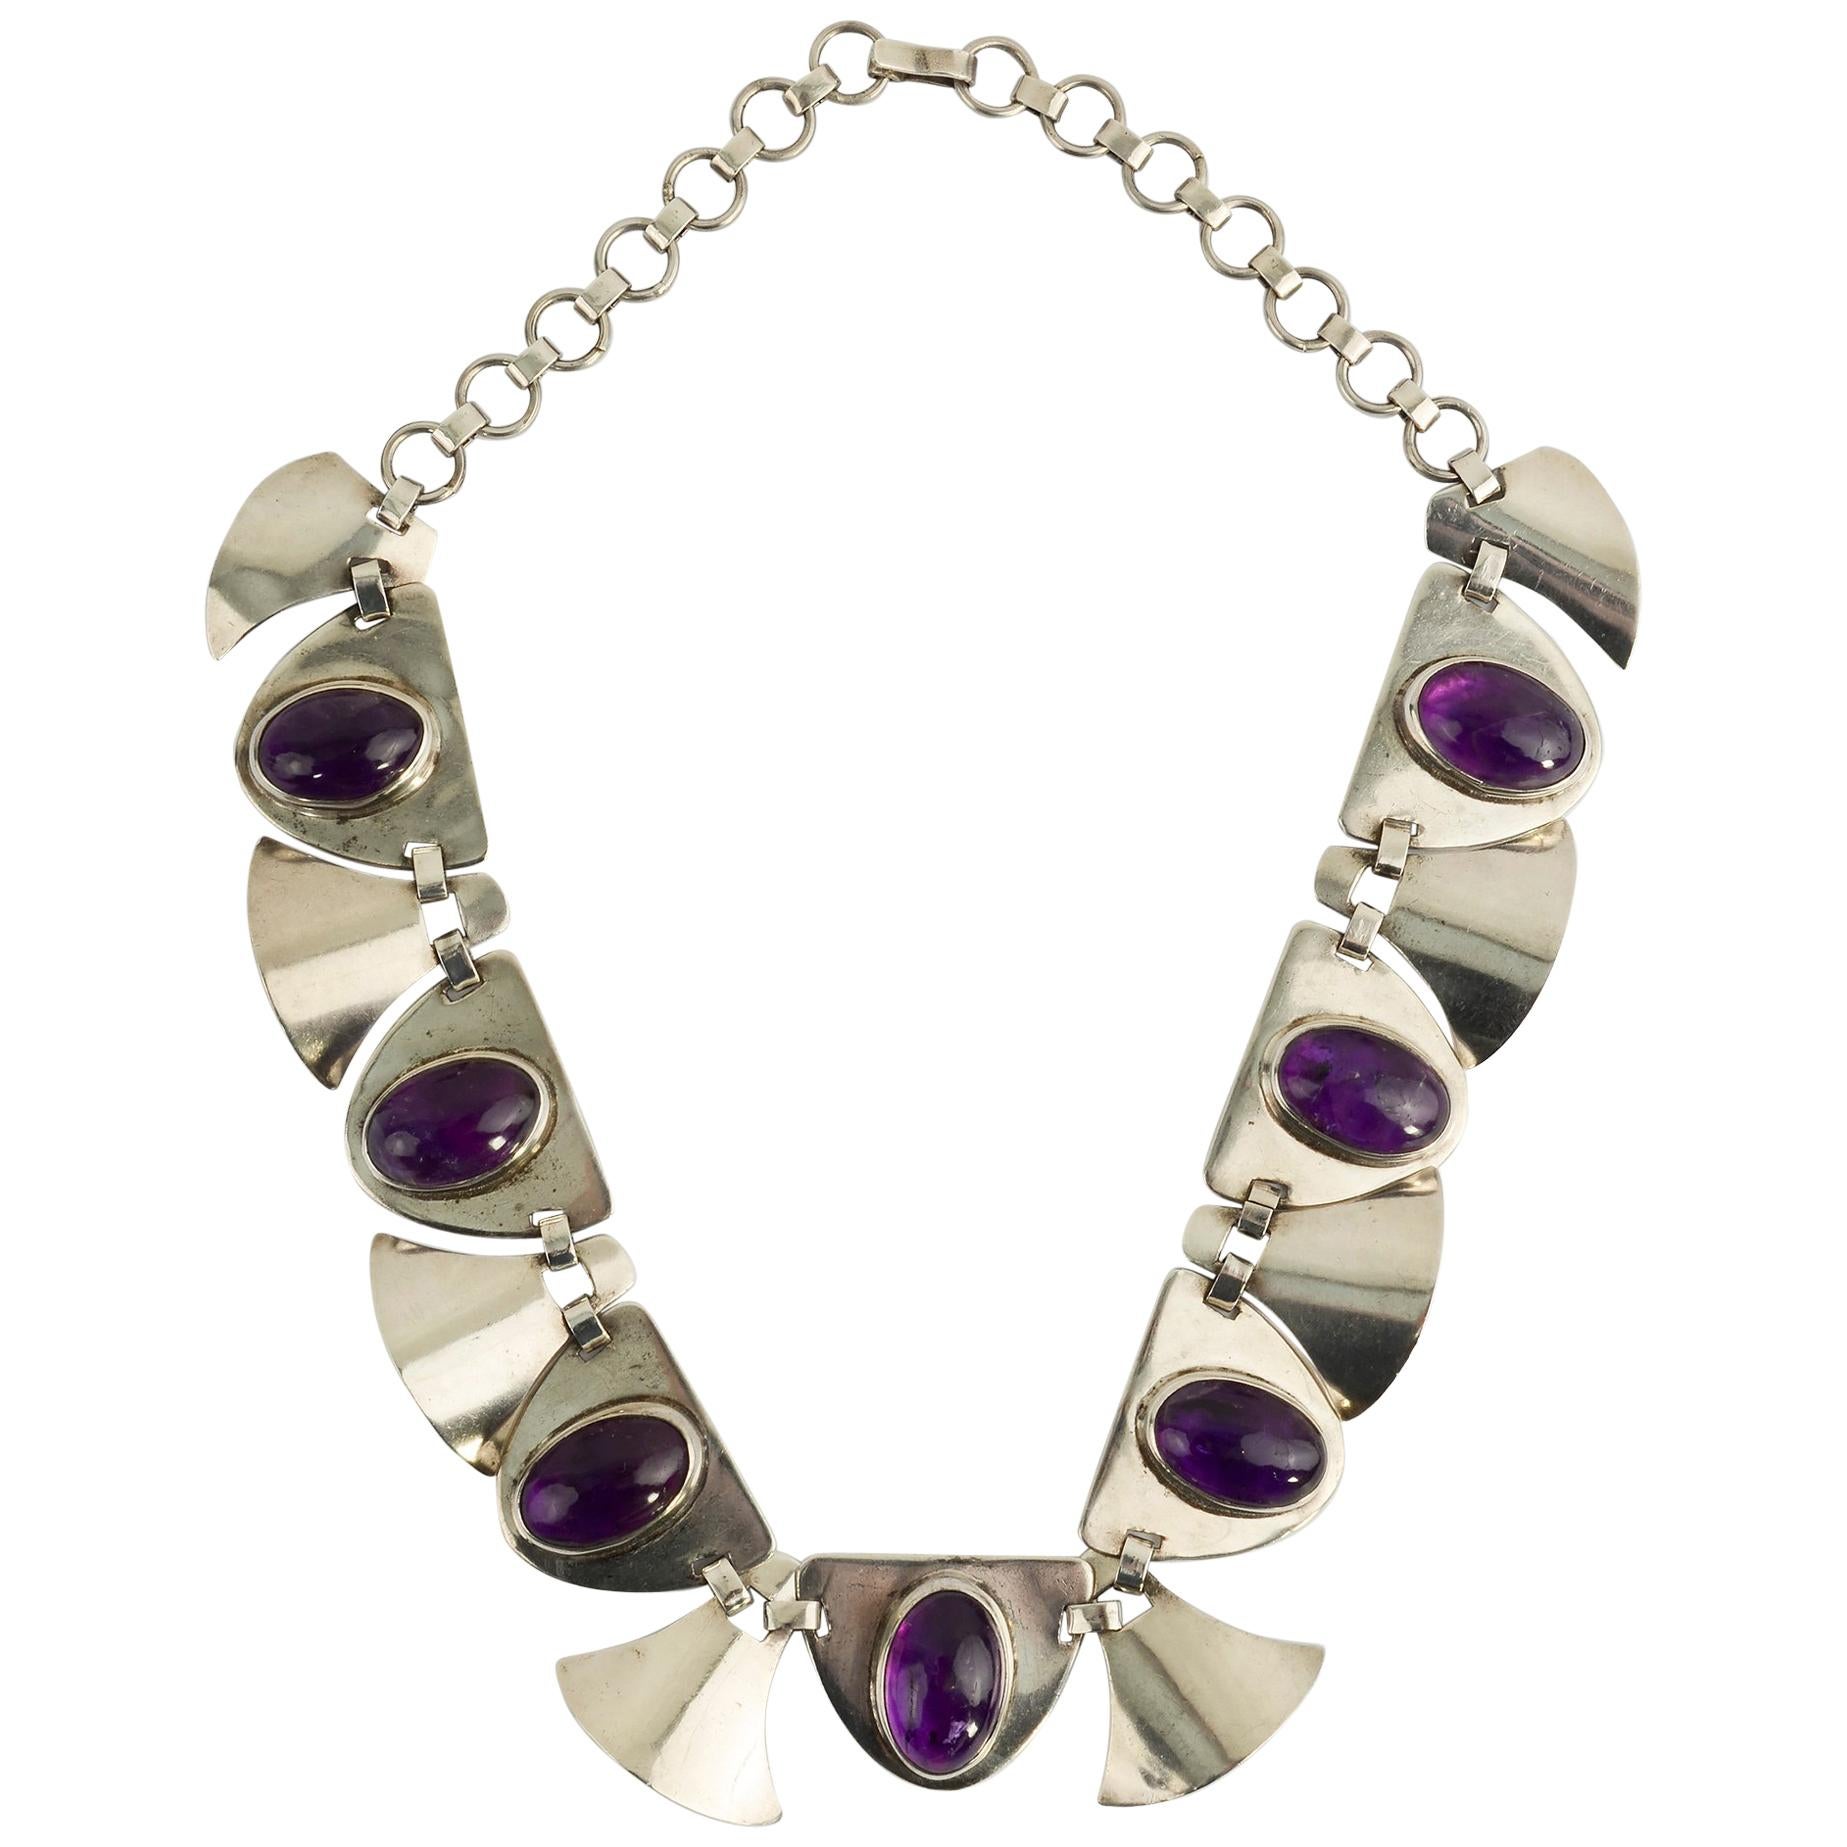 Fred Davis Silver and Amethyst Necklace